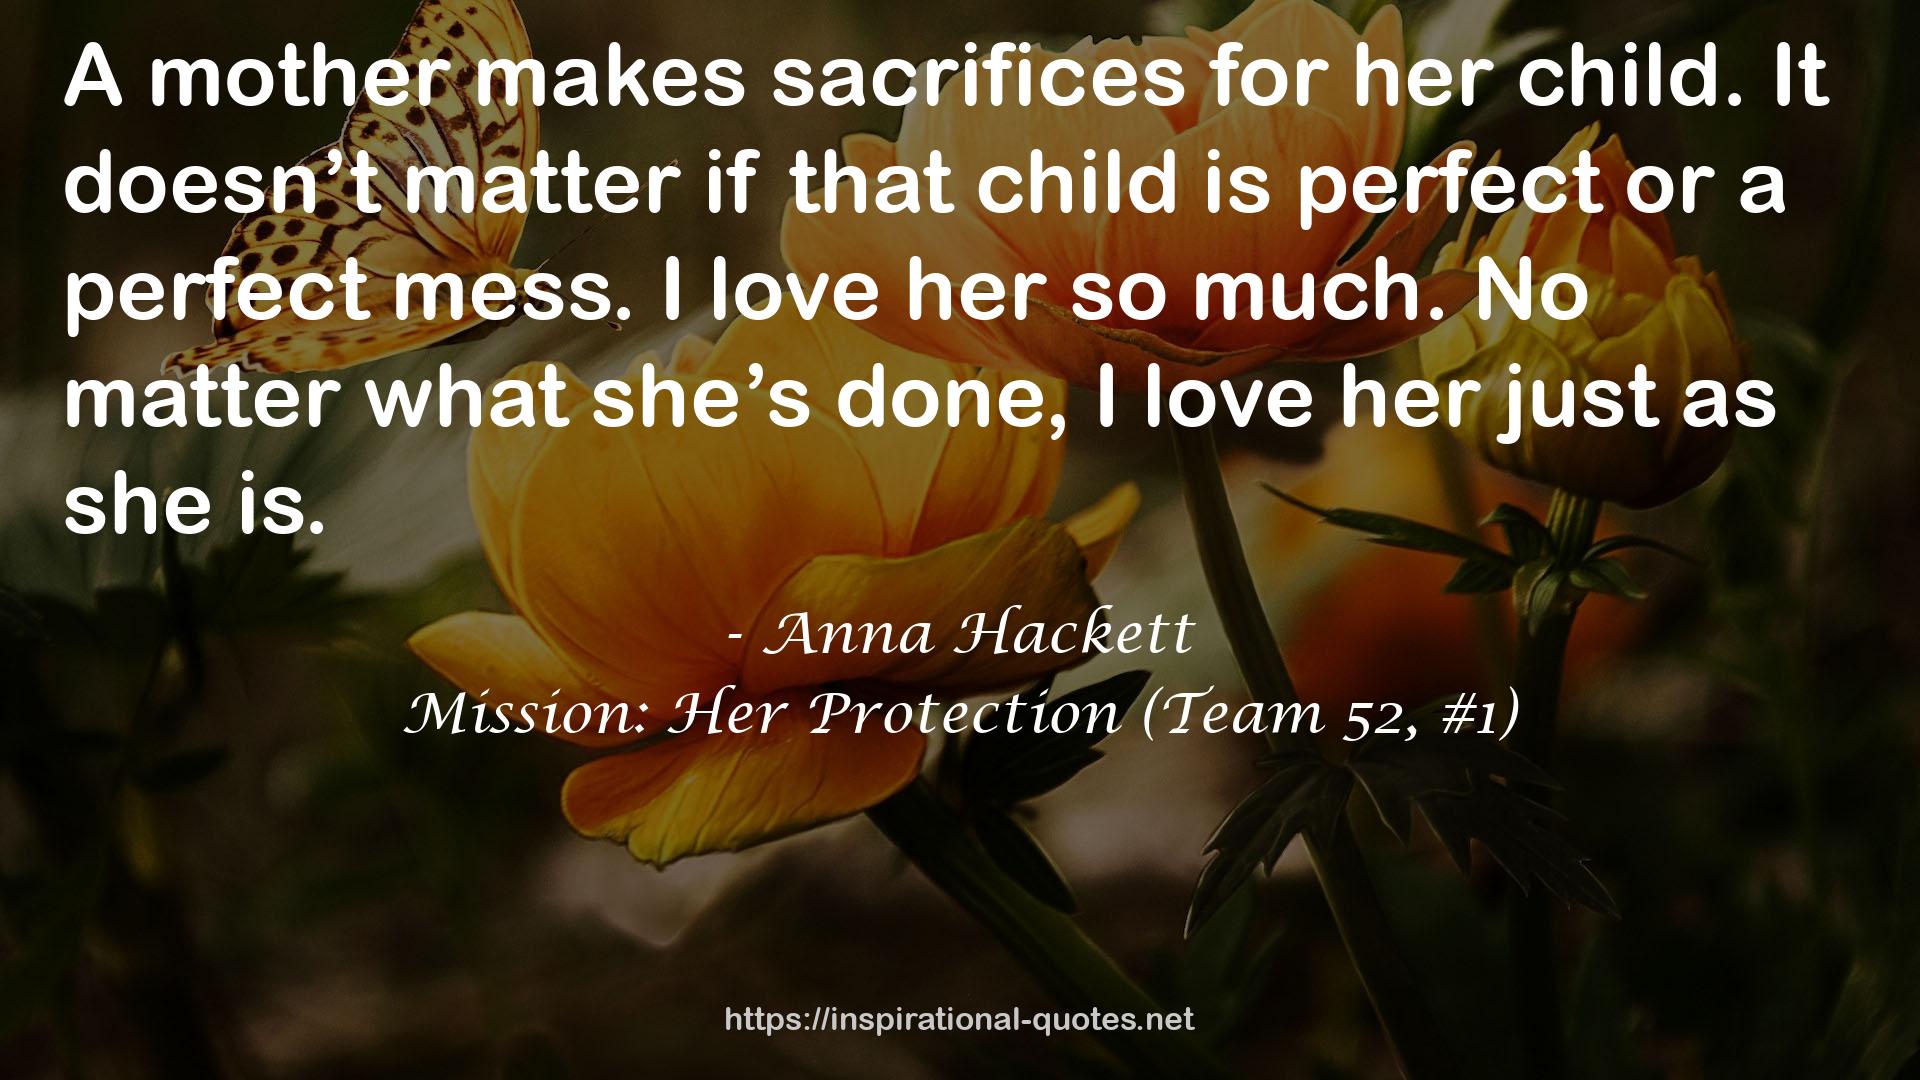 Mission: Her Protection (Team 52, #1) QUOTES